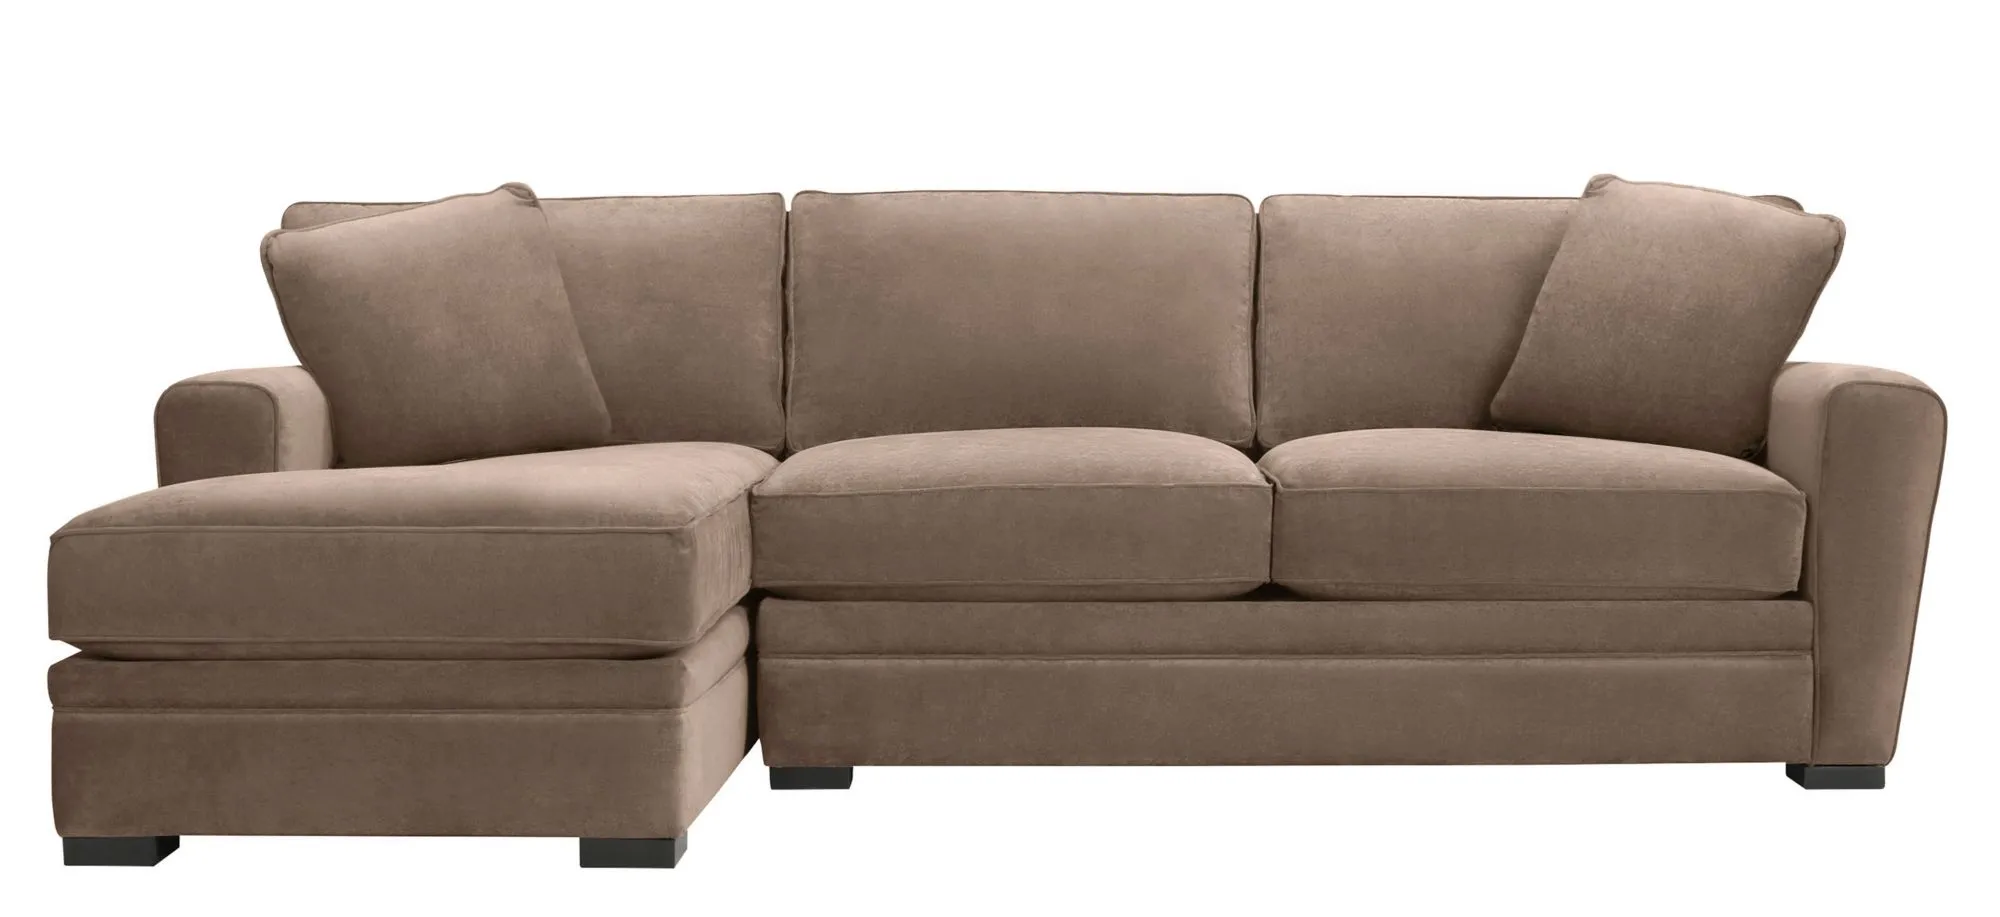 Artemis II 2-pc. Left Hand Facing Sectional Sofa in Gypsy Taupe by Jonathan Louis